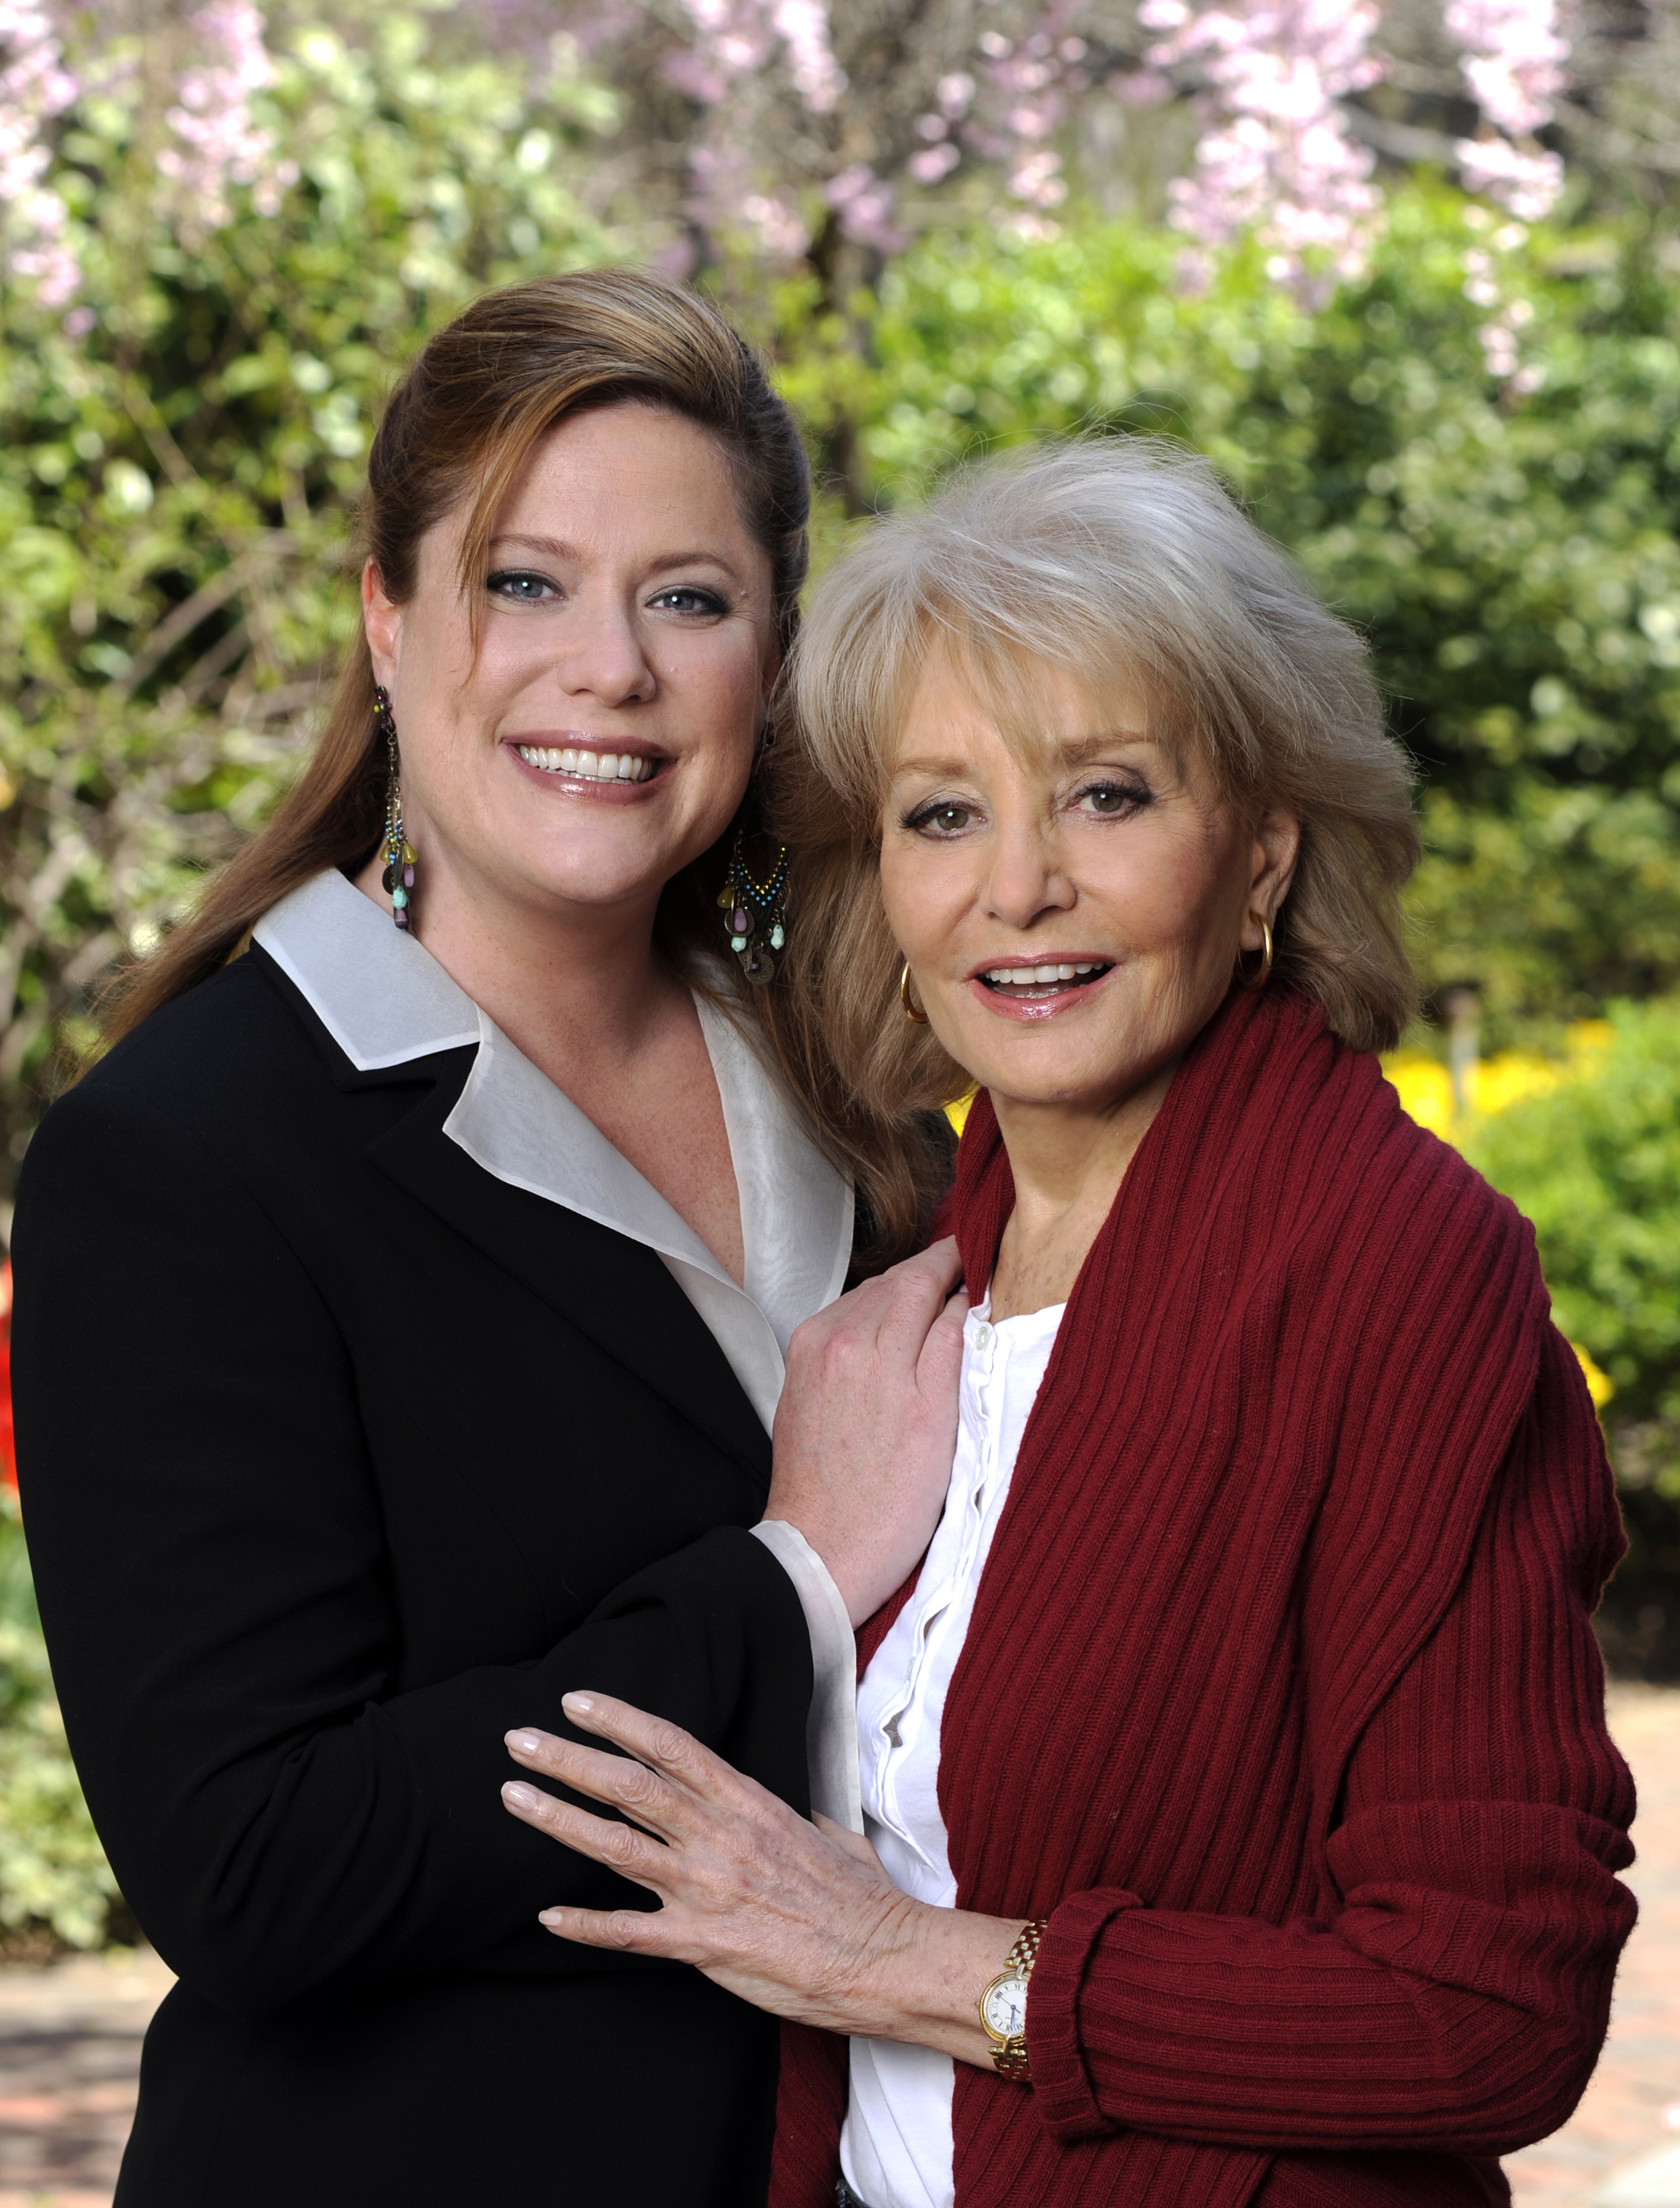 Jackie Danforth and Barbara Walters on the "Audition: Barbara Walters' Journey" news special on April 18, 2008 | Source: Getty Images